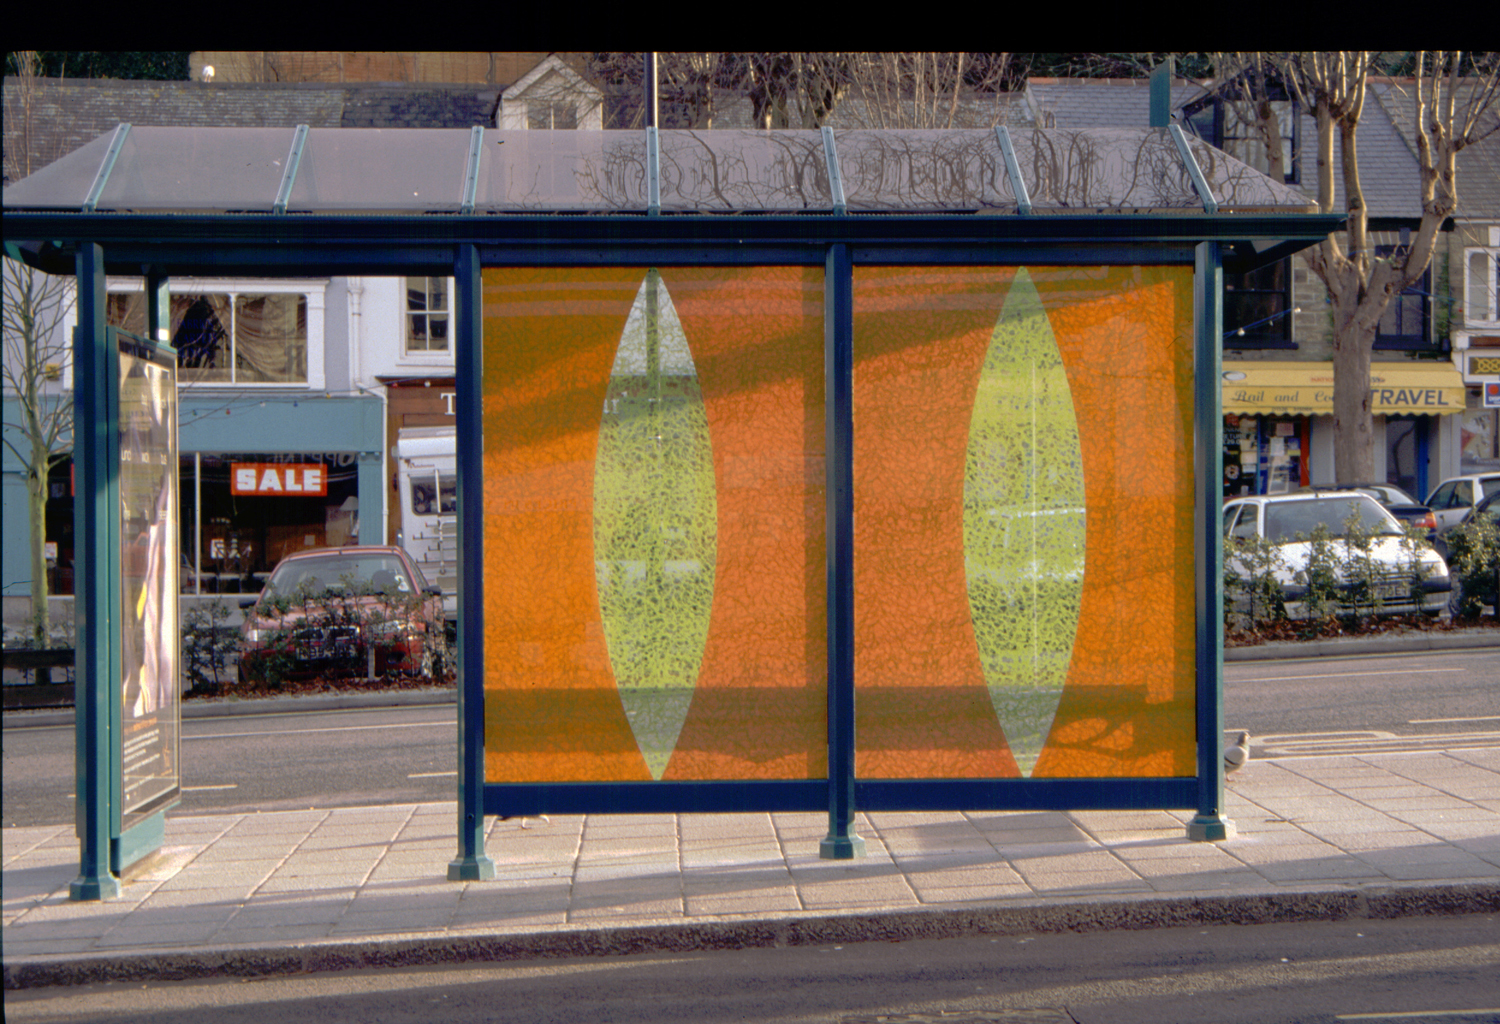 7 The Moor, Falmouth - Bus Shelter Panels.jpg